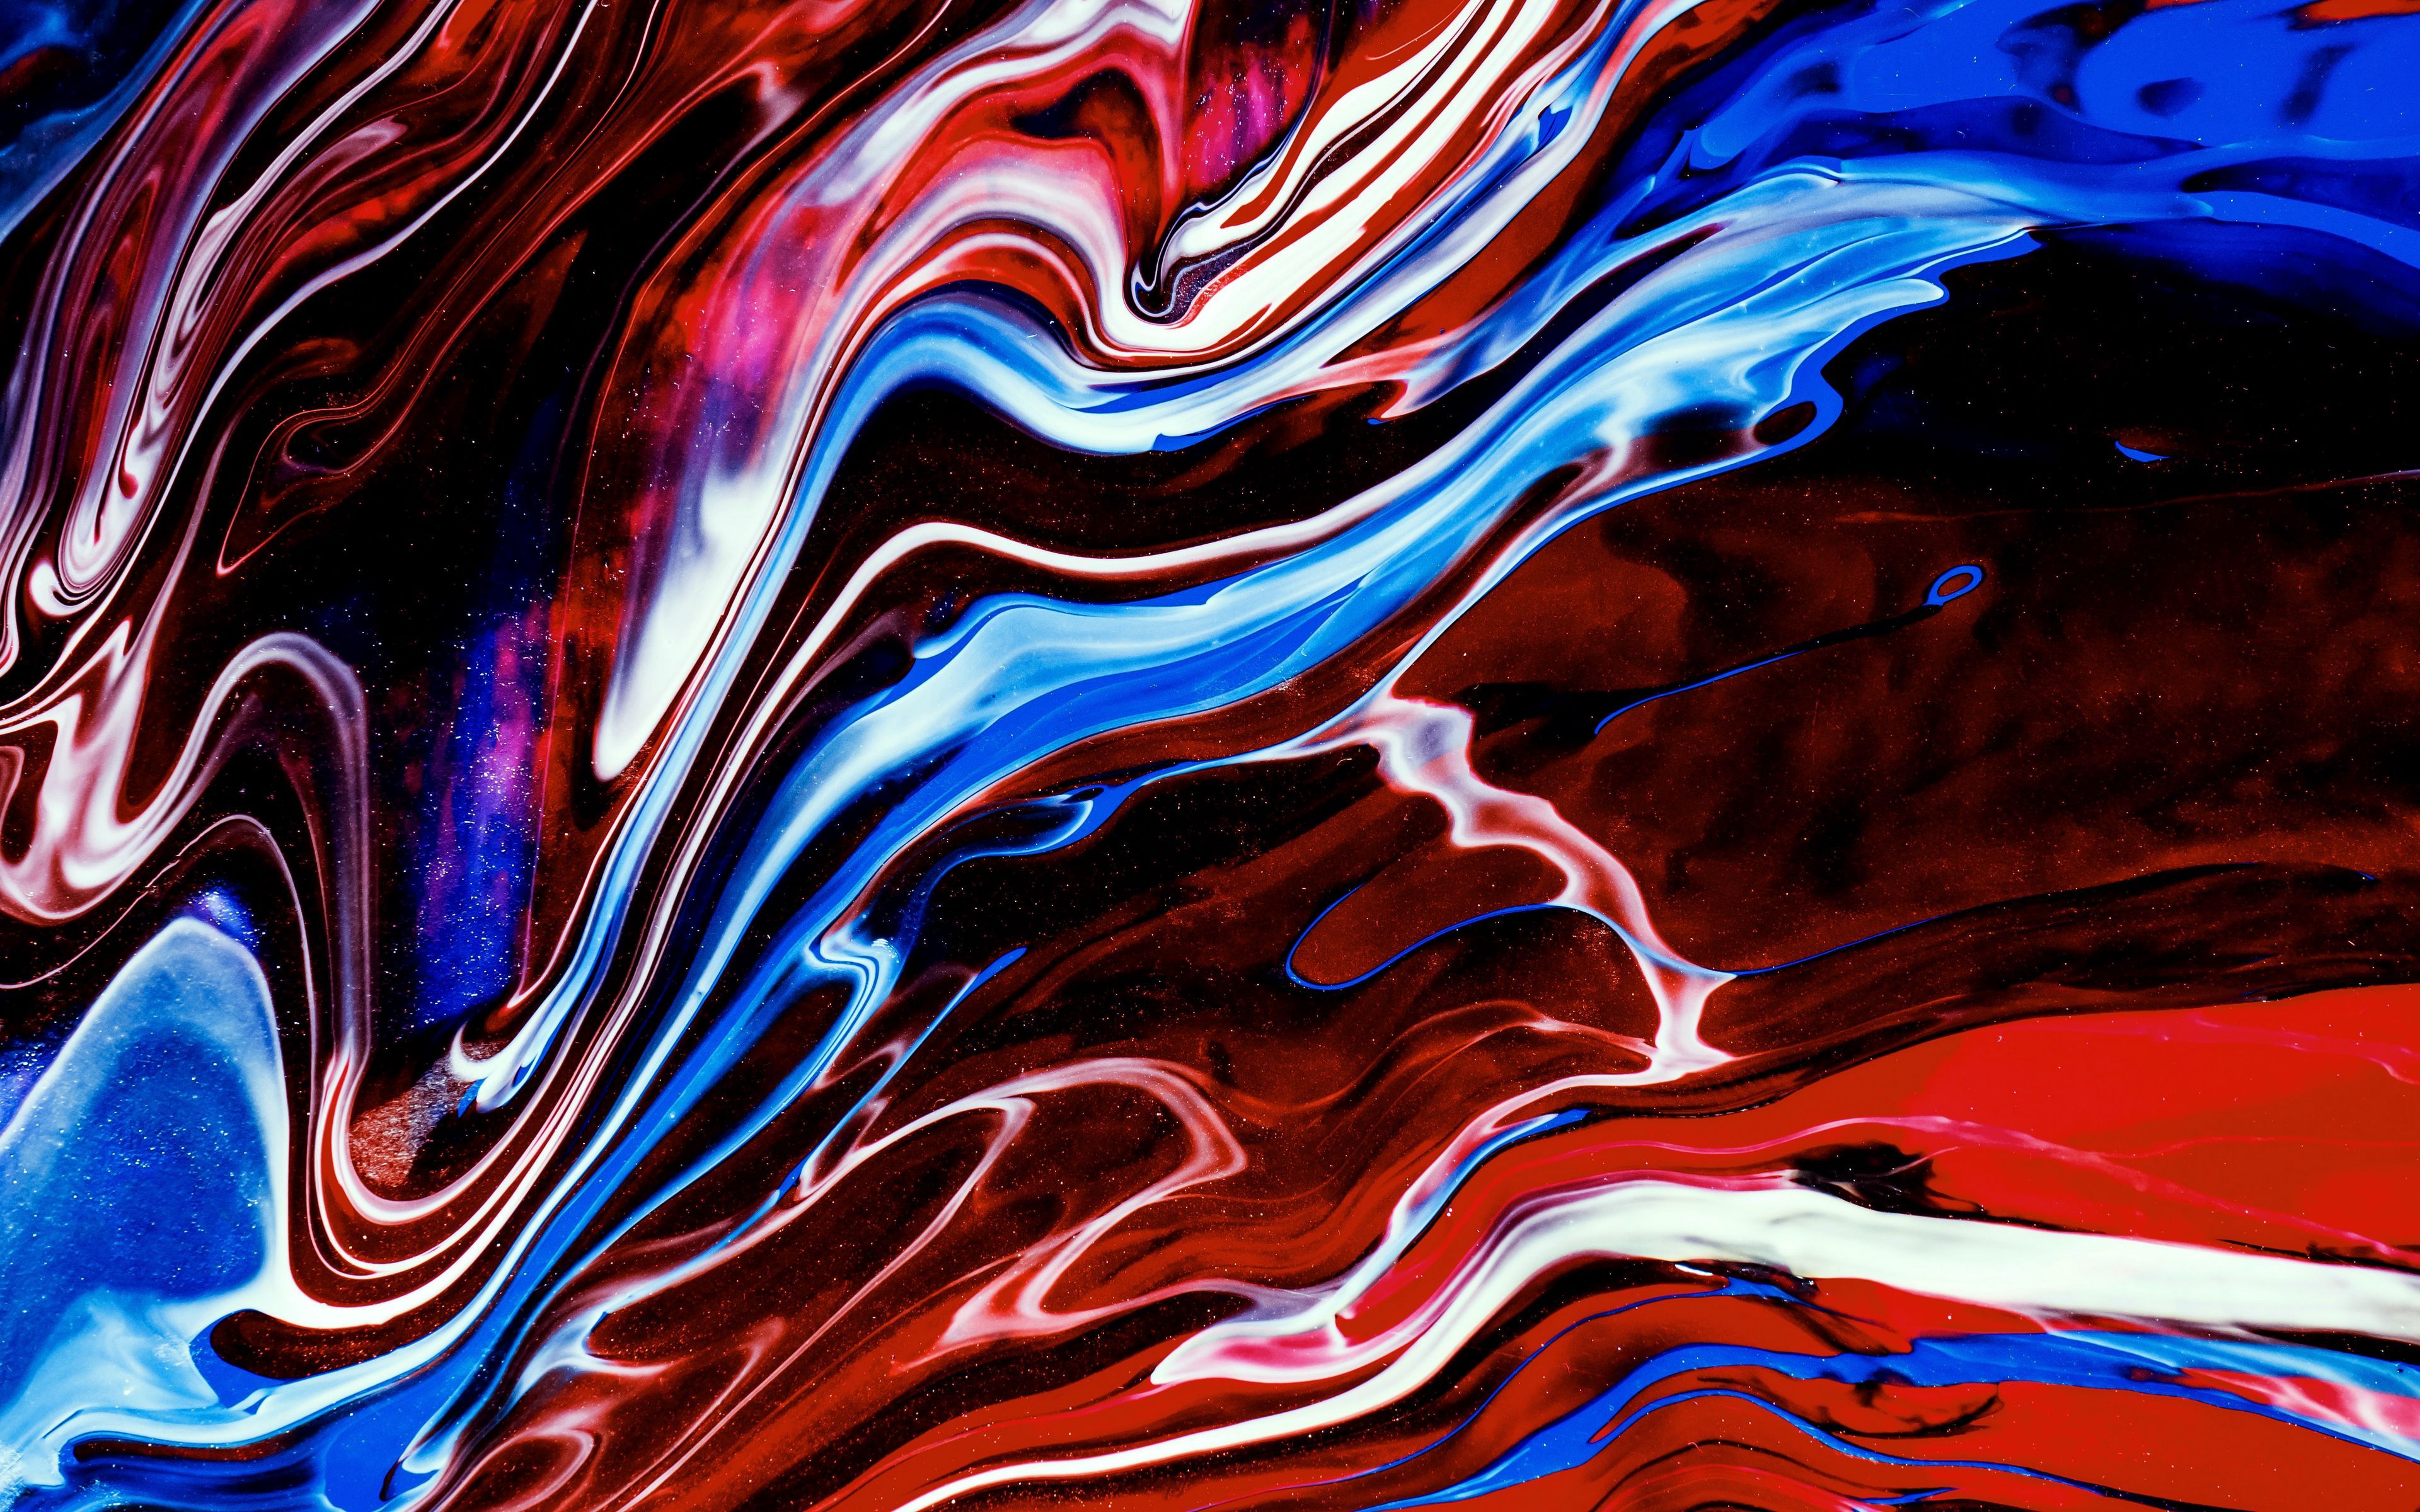 Download wallpaper 3840x2400 paint, fluid art, stains, liquid, colorful, blue, red 4k ultra HD 16:10 HD background